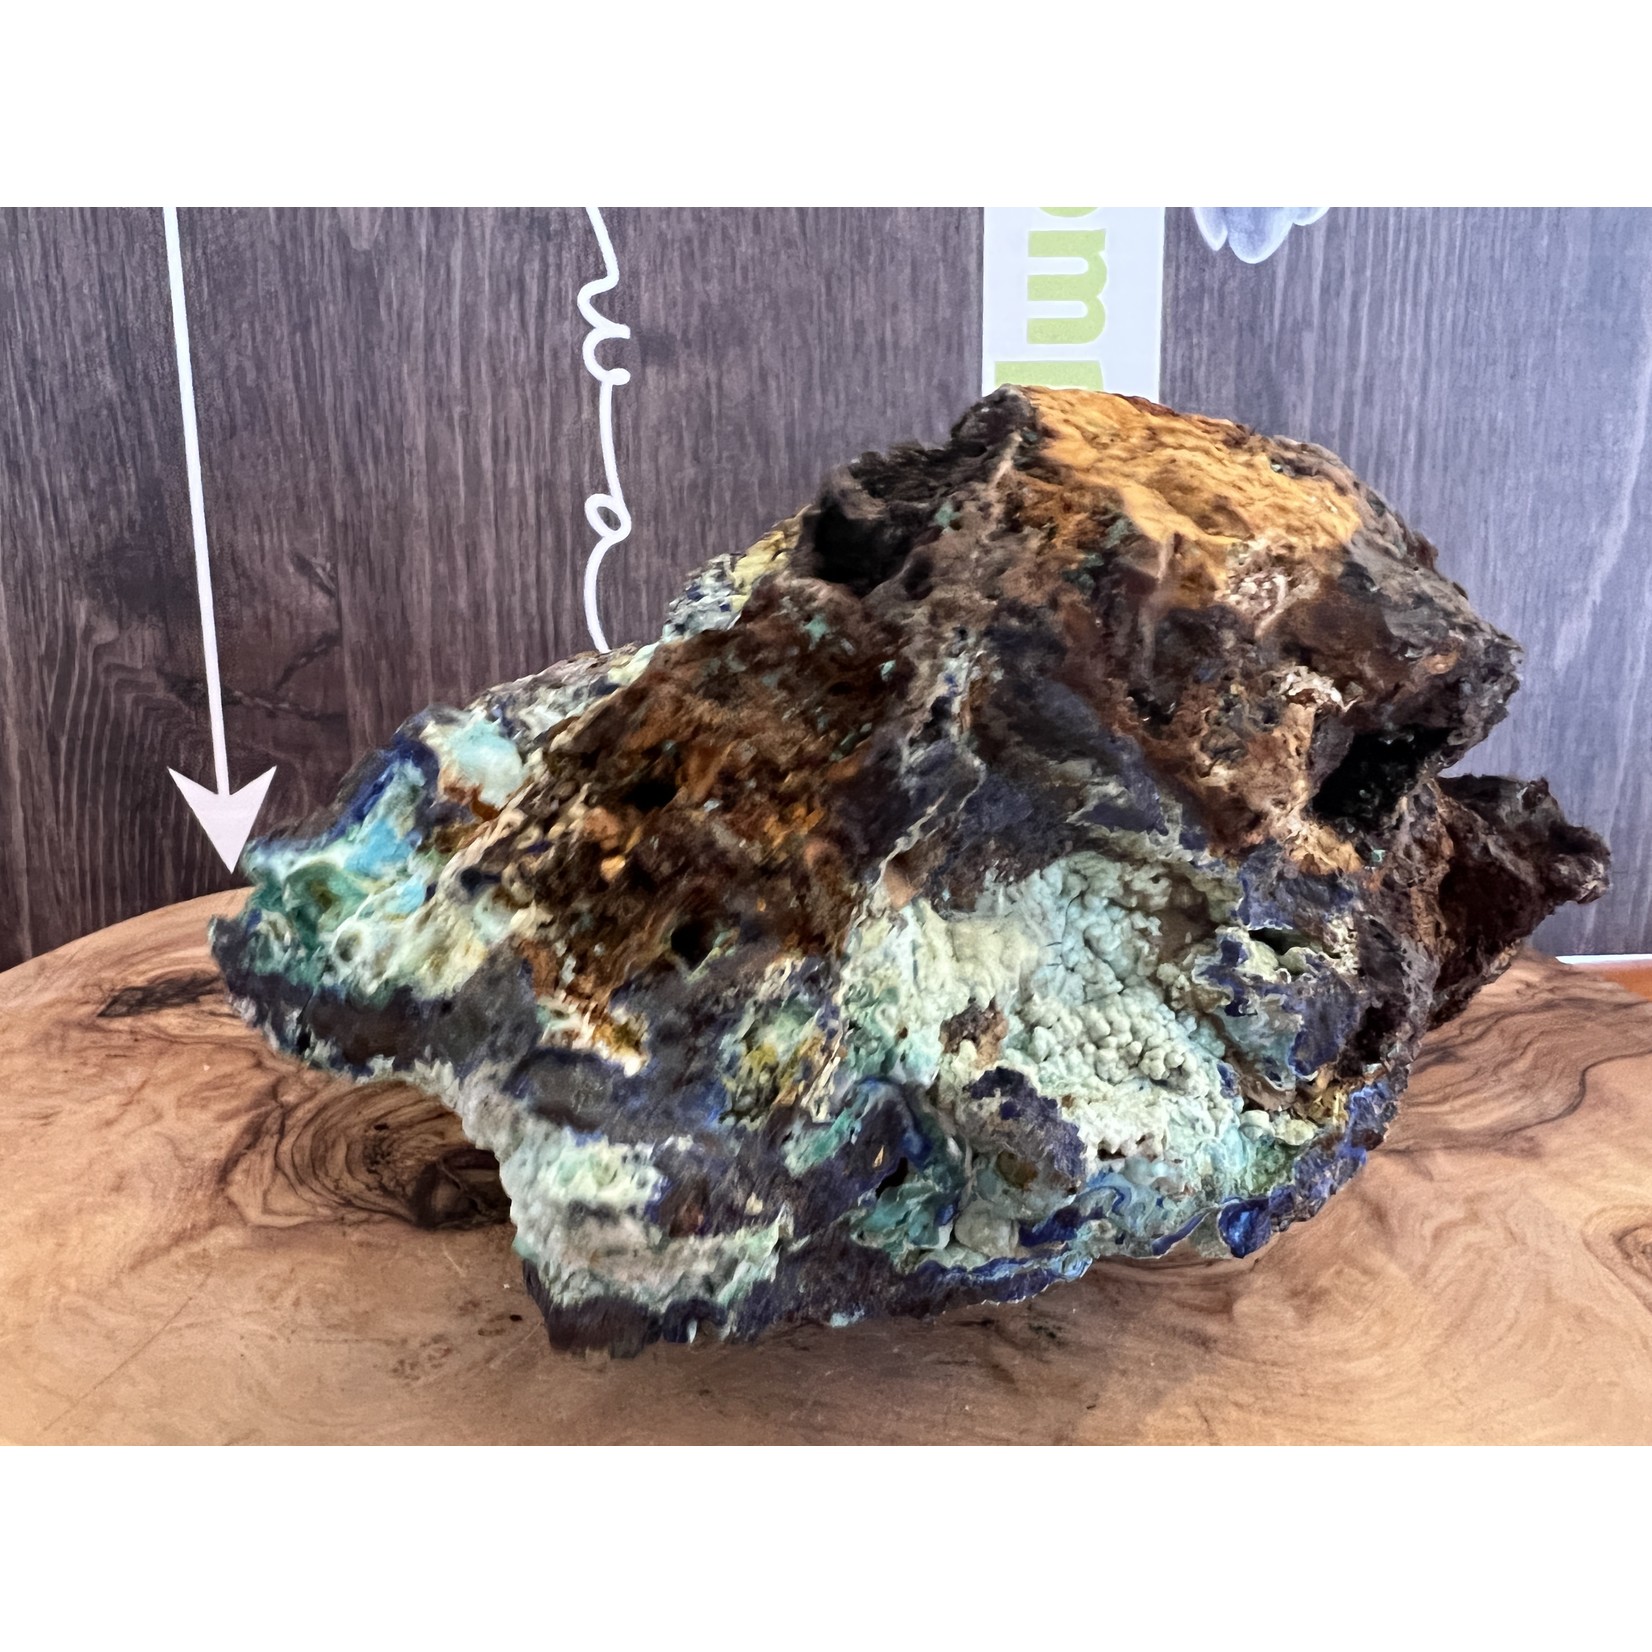 extra large azurite malachite special specimen, helps all of our body systems work together